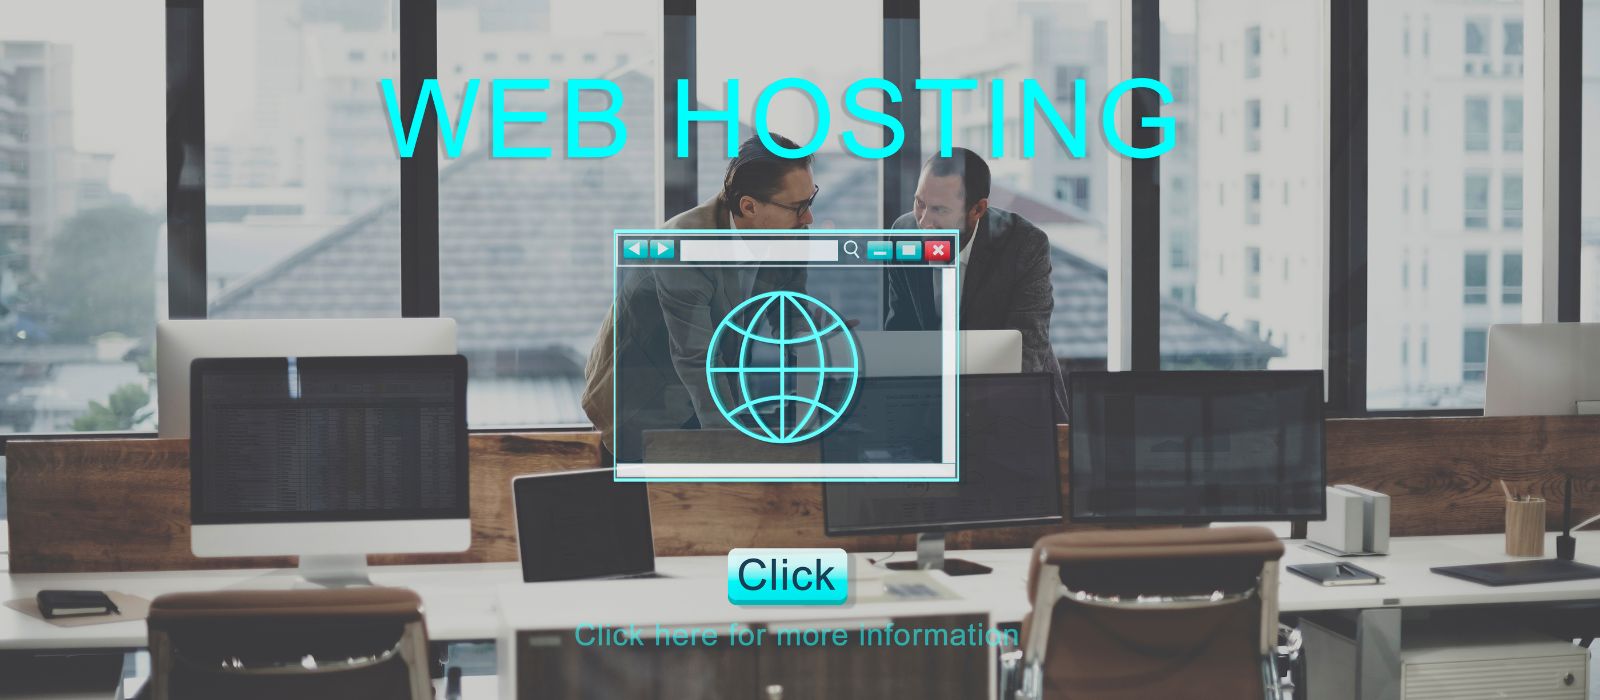 A Guide to the Best Small Business Website Builder and Hosting